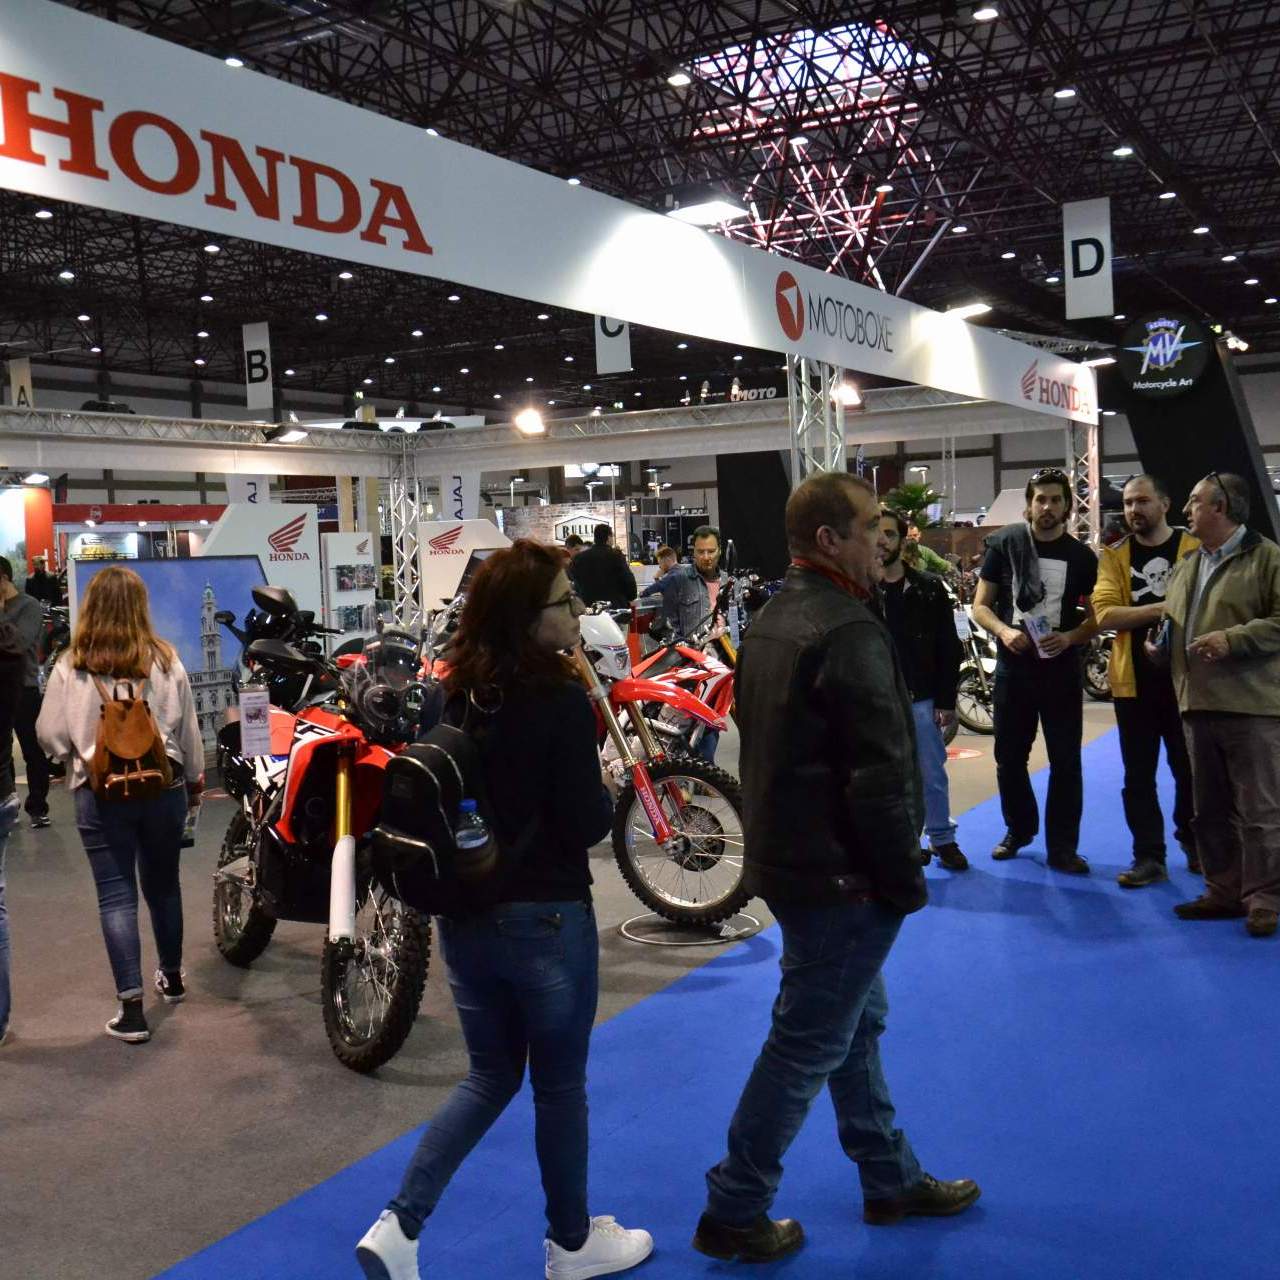 EXPOMOTO kicks off next week with the presence of major brands in the market